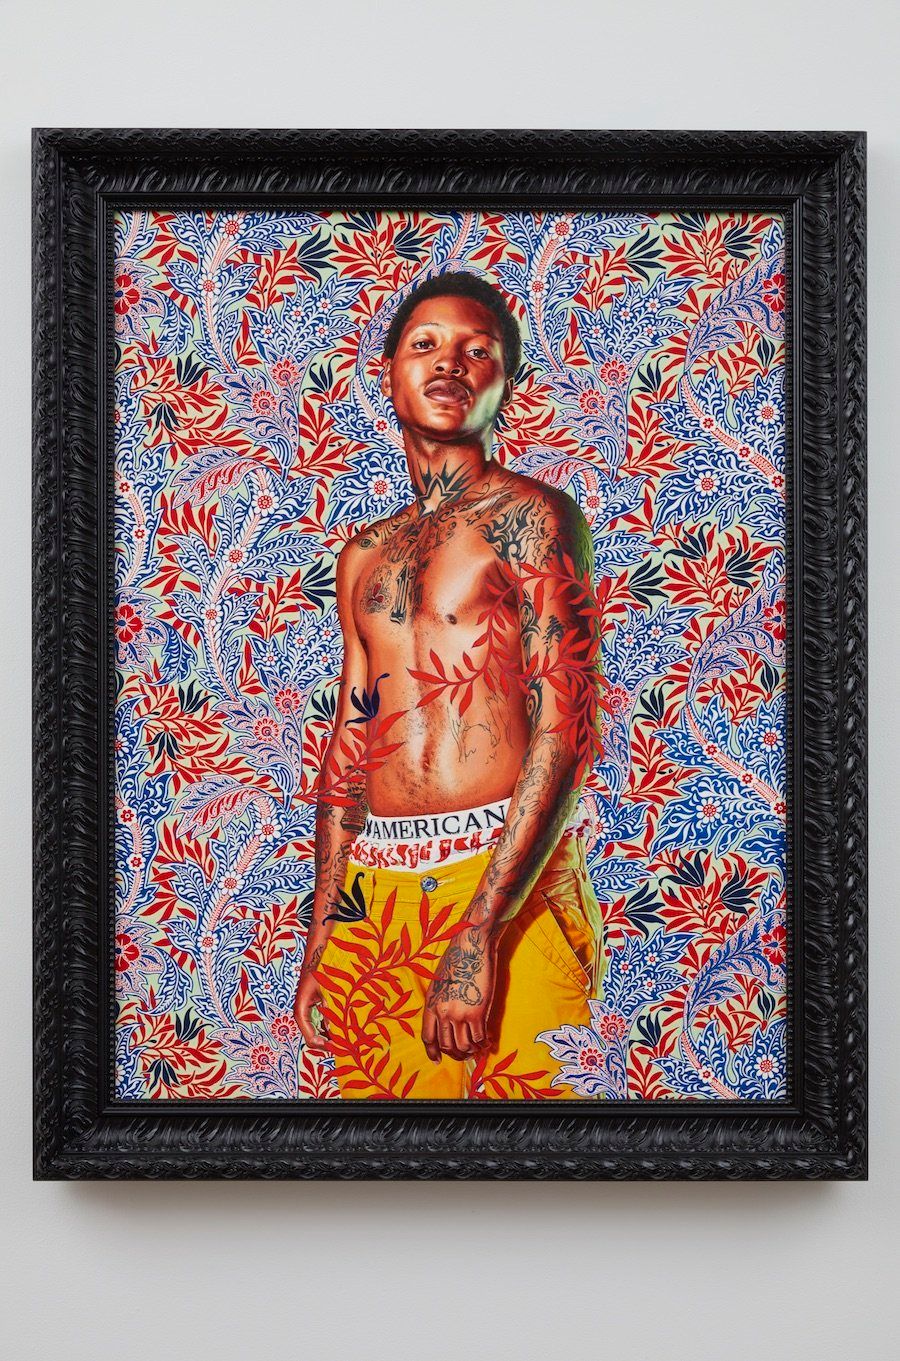 Kehinde Wiley, "Mrs. Charles E. Inches," 2013, oil on linen